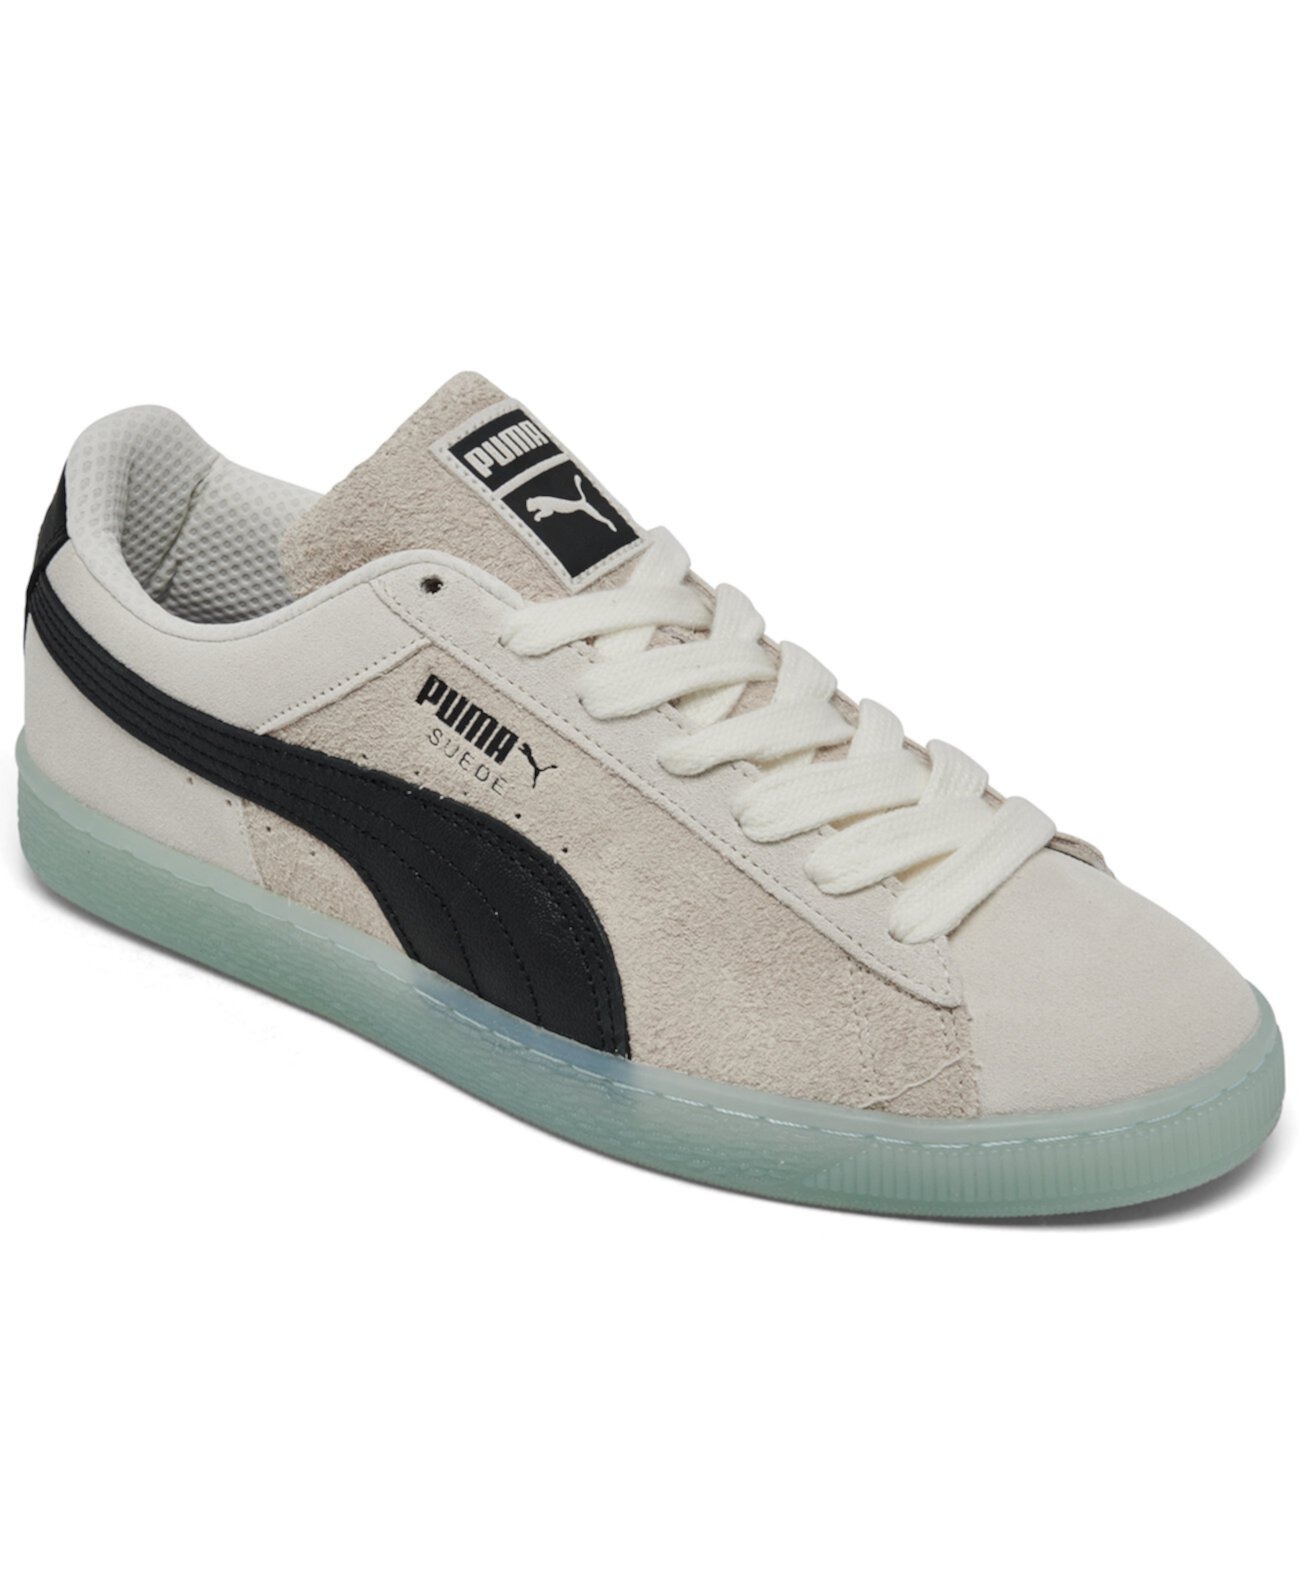 Men's Suede Classic Mist Casual Sneakers from Finish Line PUMA